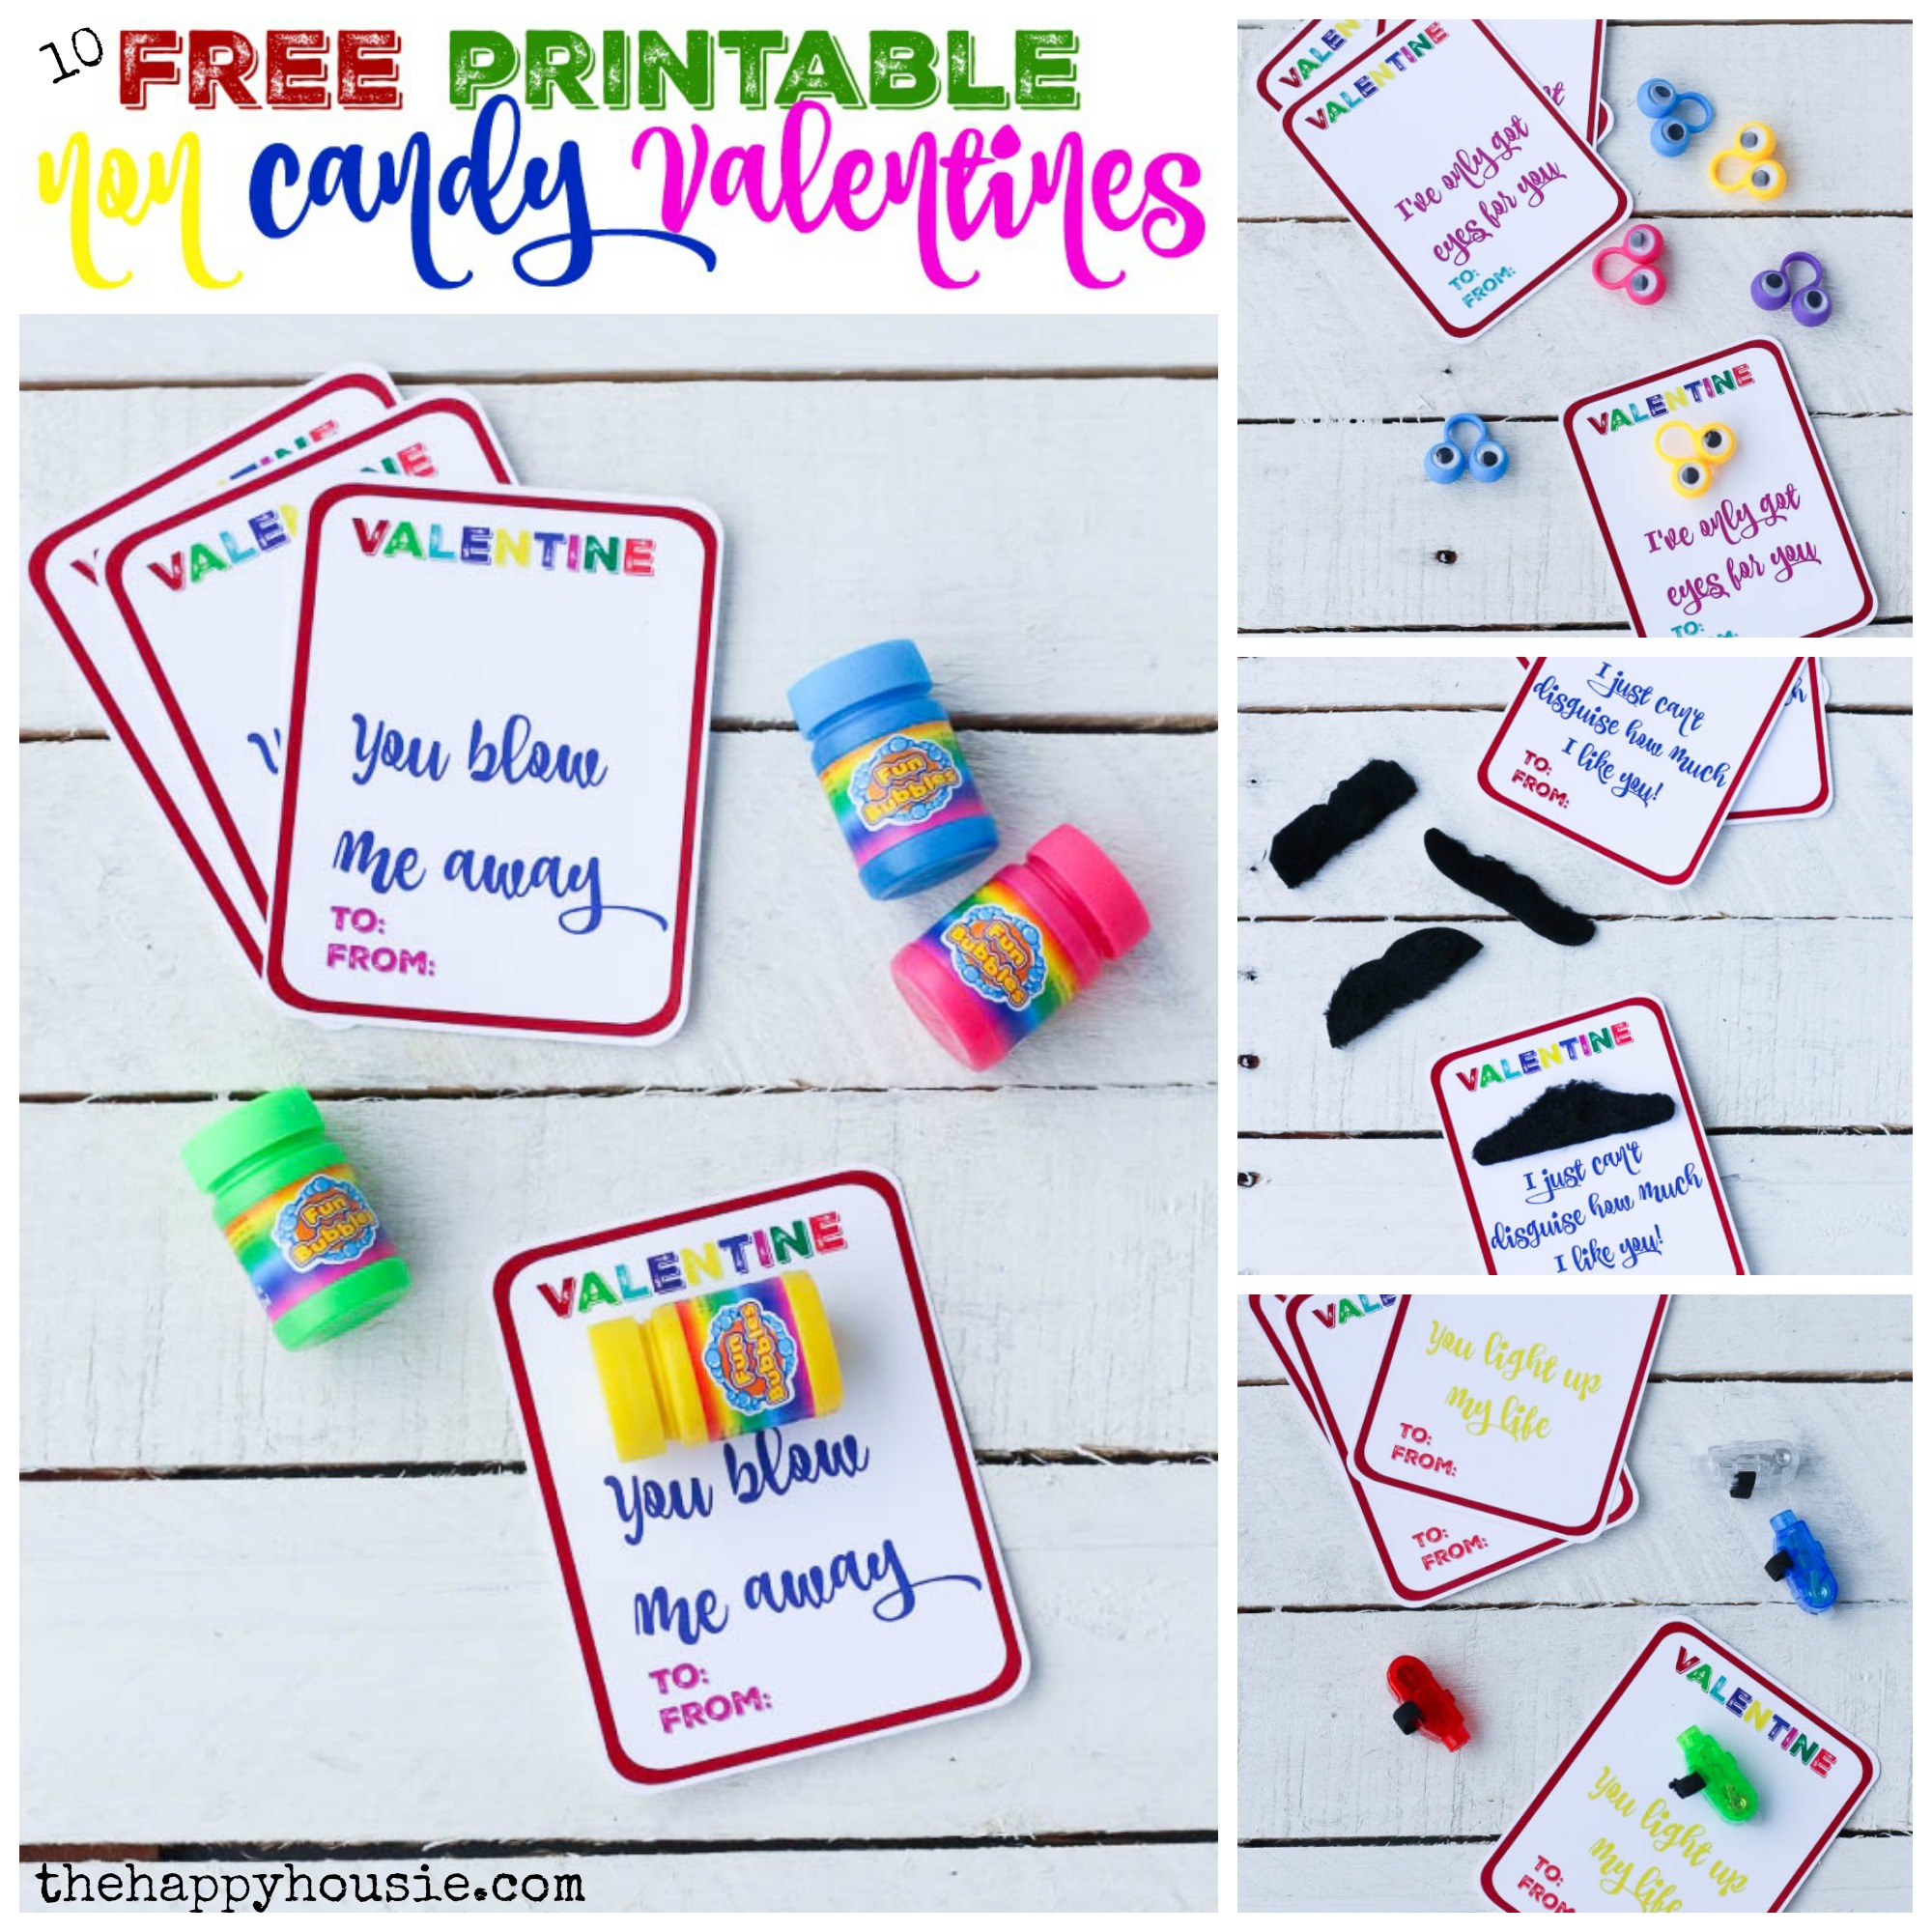 10 Free Printable Non Candy Valentines